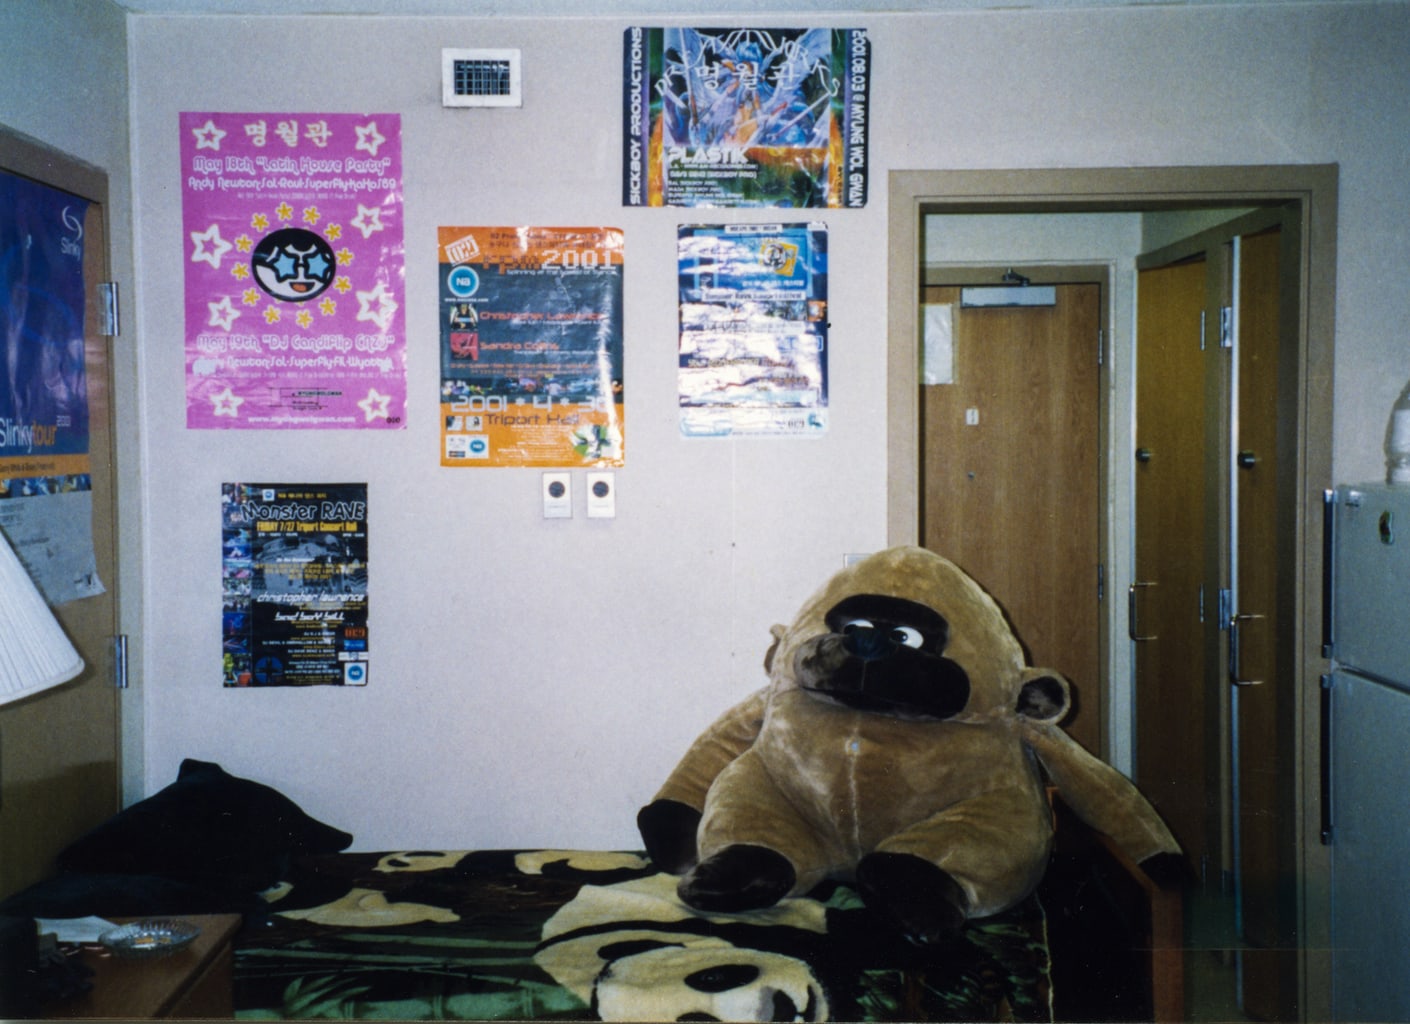 Seoul rave posters, 2001